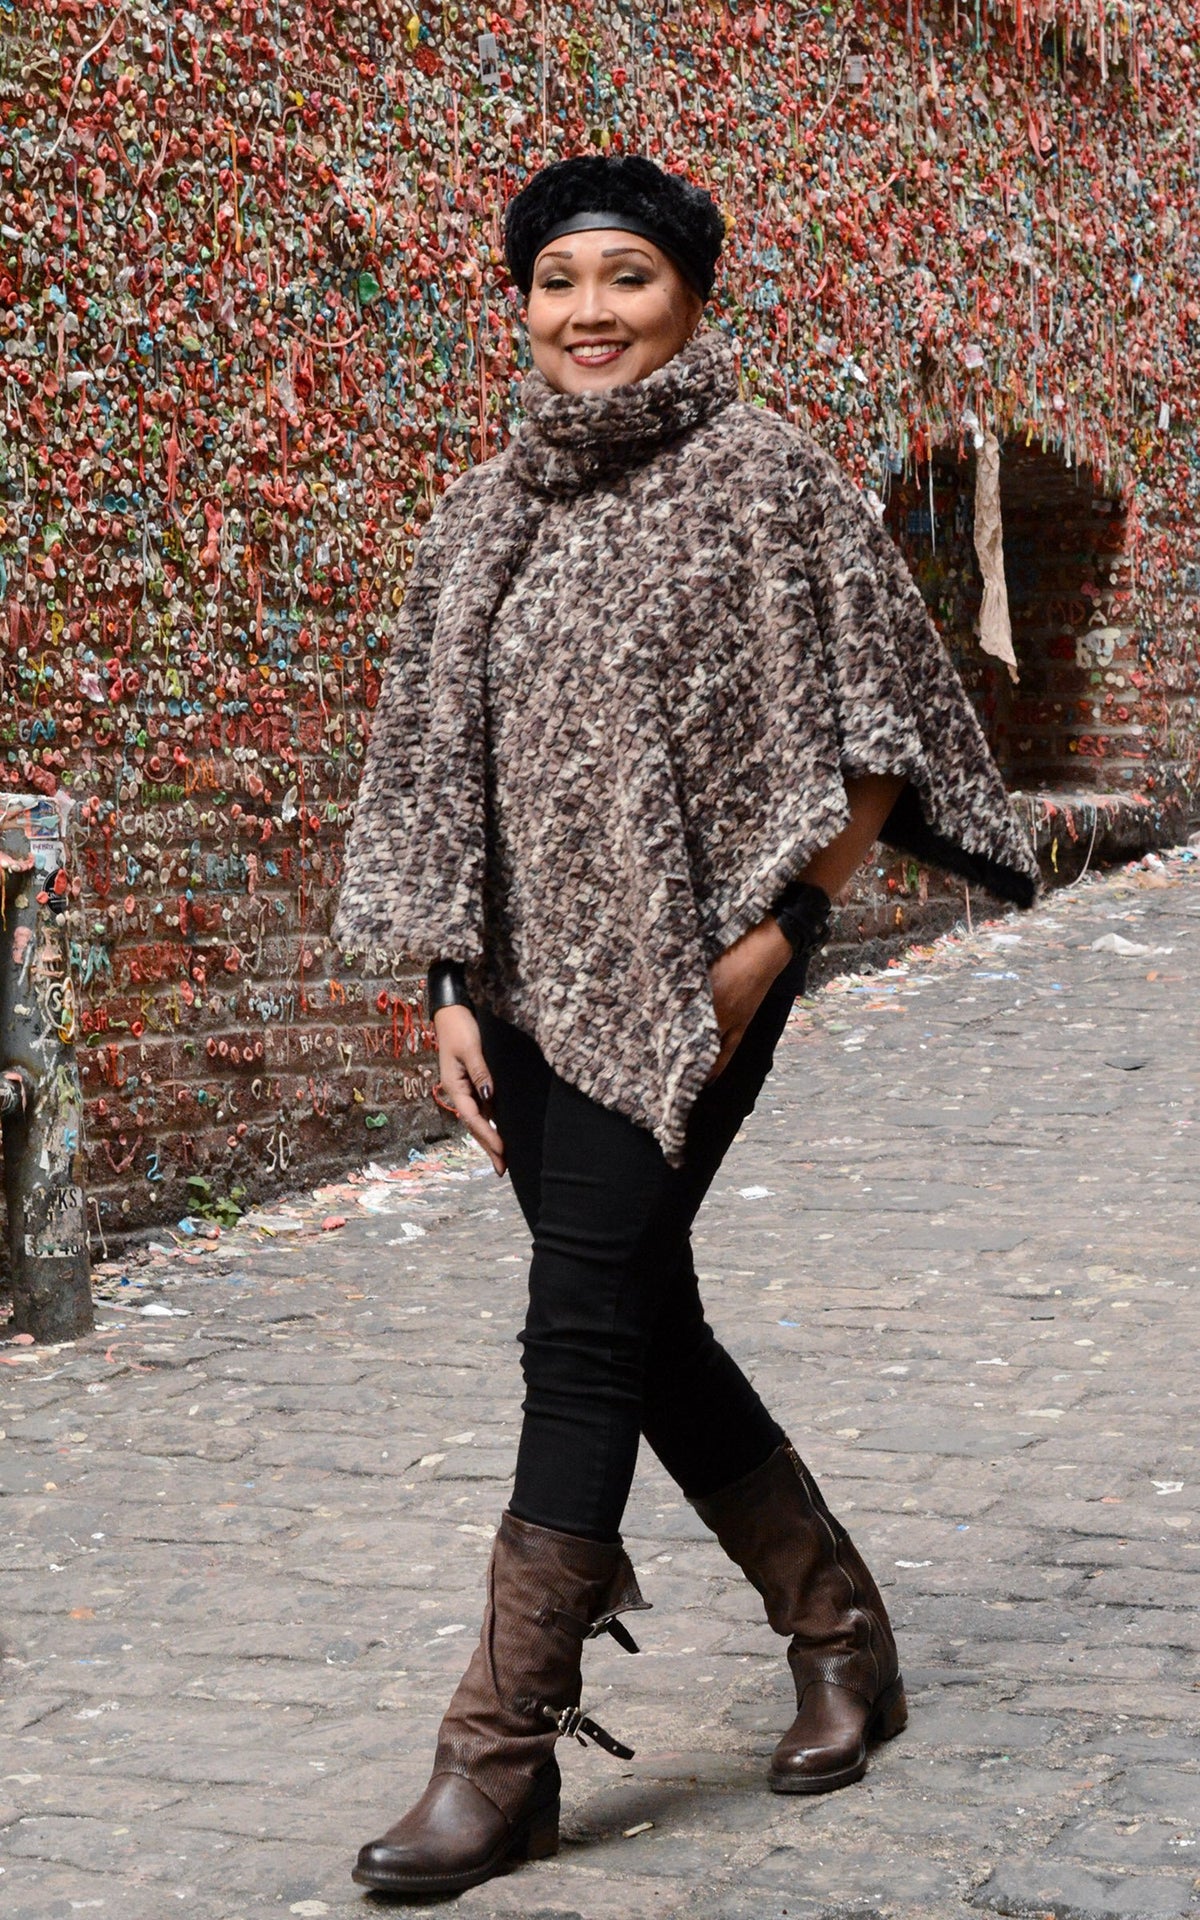 Model walking next to a Gum Wall  in Faux Fur Beret wearing a Satin Lined Poncho | Calico Brown and Cream Faux Fur | Handmade Seattle WA USA by Pandemonium Millinery